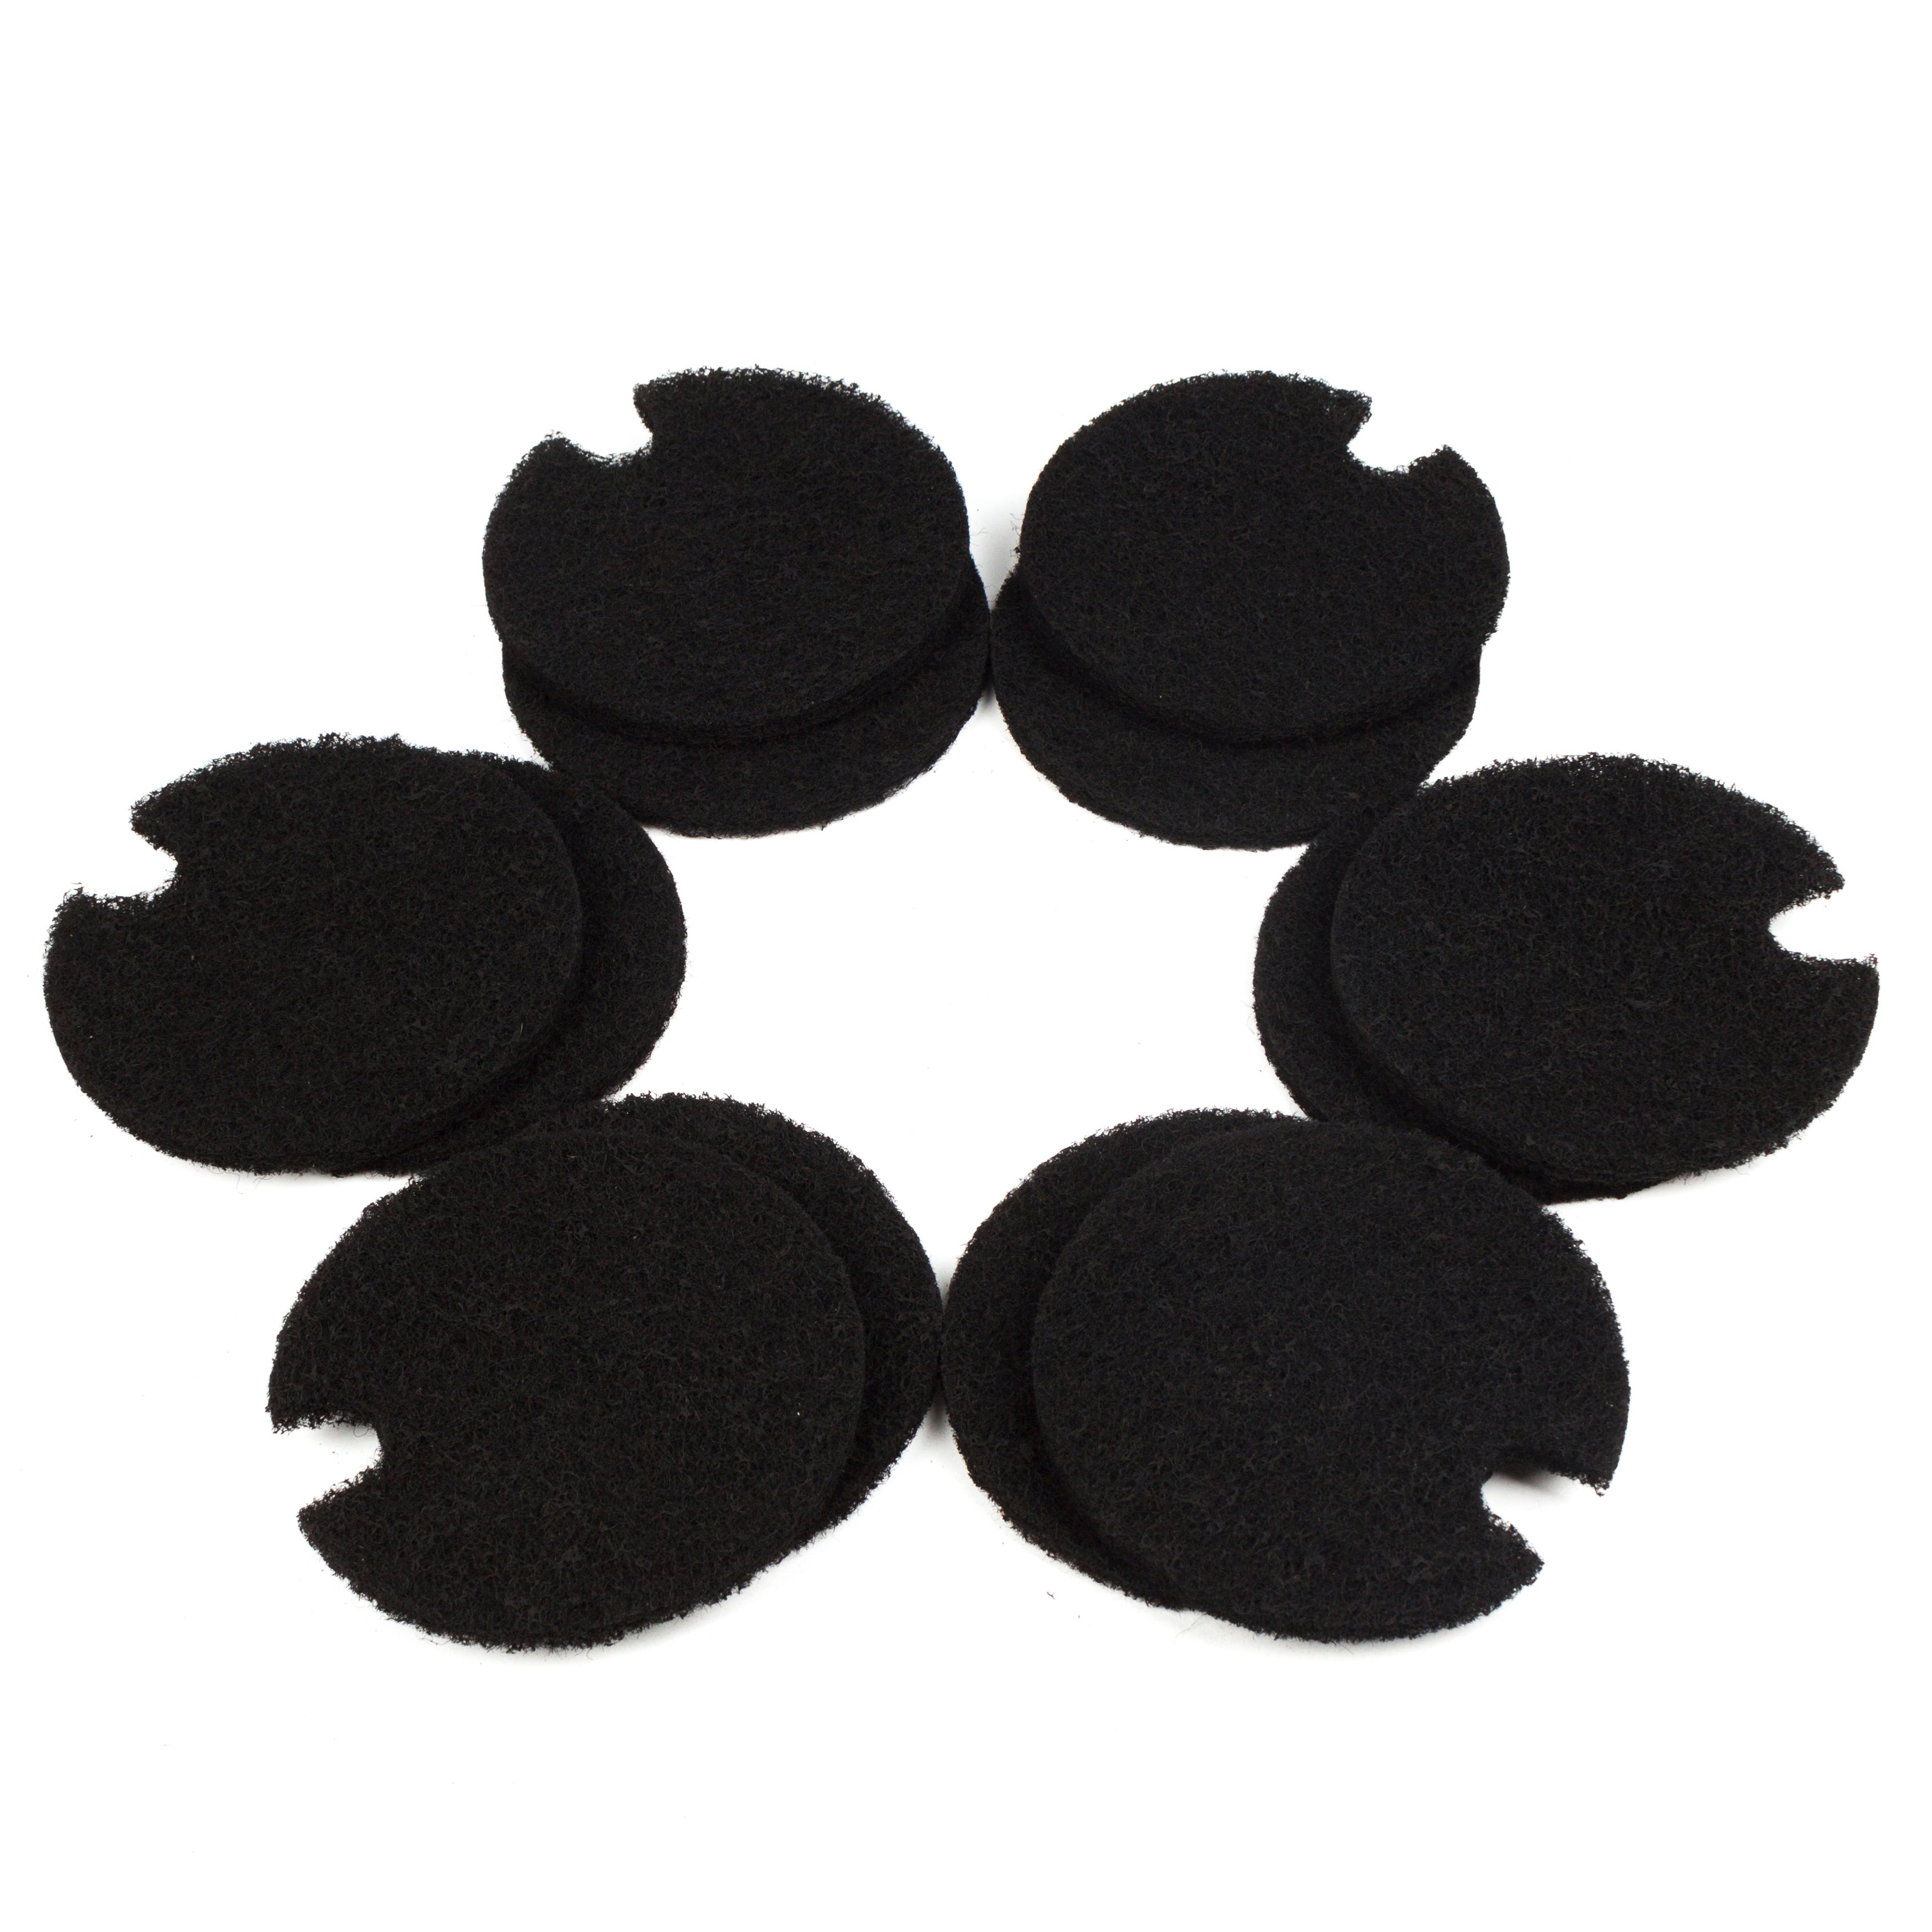 LTWHOME Carbon Filter Pads Compatible with Aqua Compact 40/60 (Pack of 12)